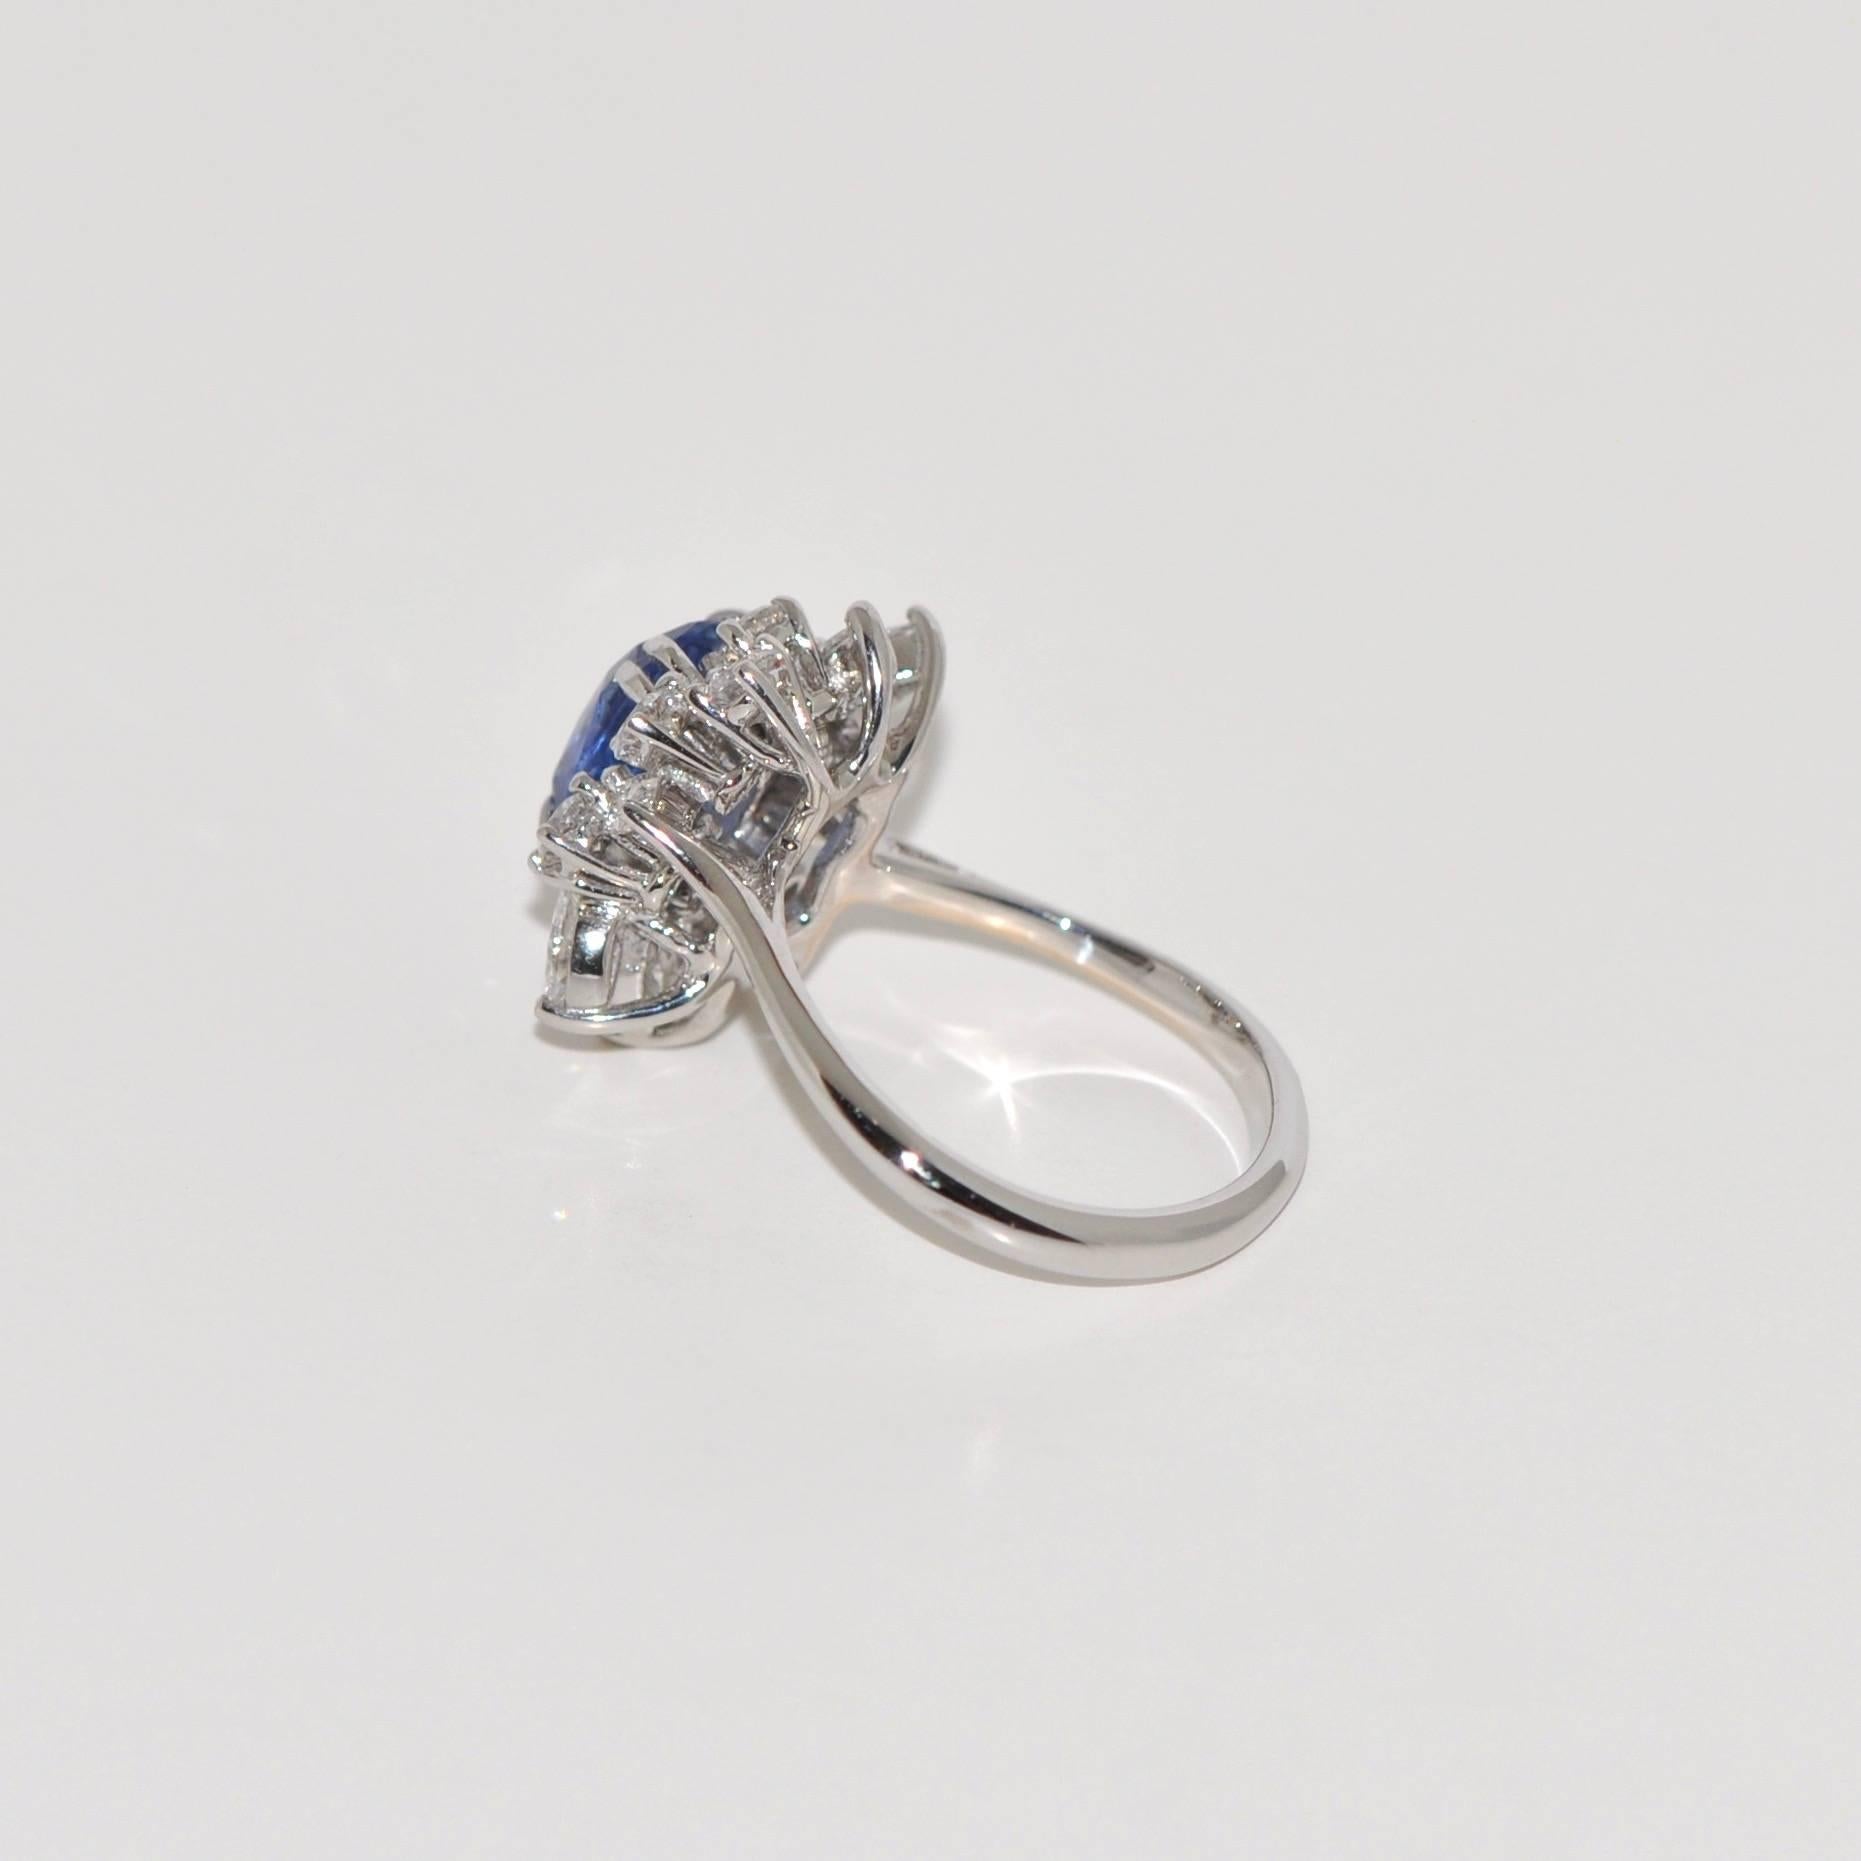 Discover this Sapphire and White Diamonds White Gold Engagement Ring.
Sapphire Blue Oval 2.920 Carat
14 White Diamonds 1.240 Carat
White Gold 18 Carat 
US Size 6 1/2 
French Size 53